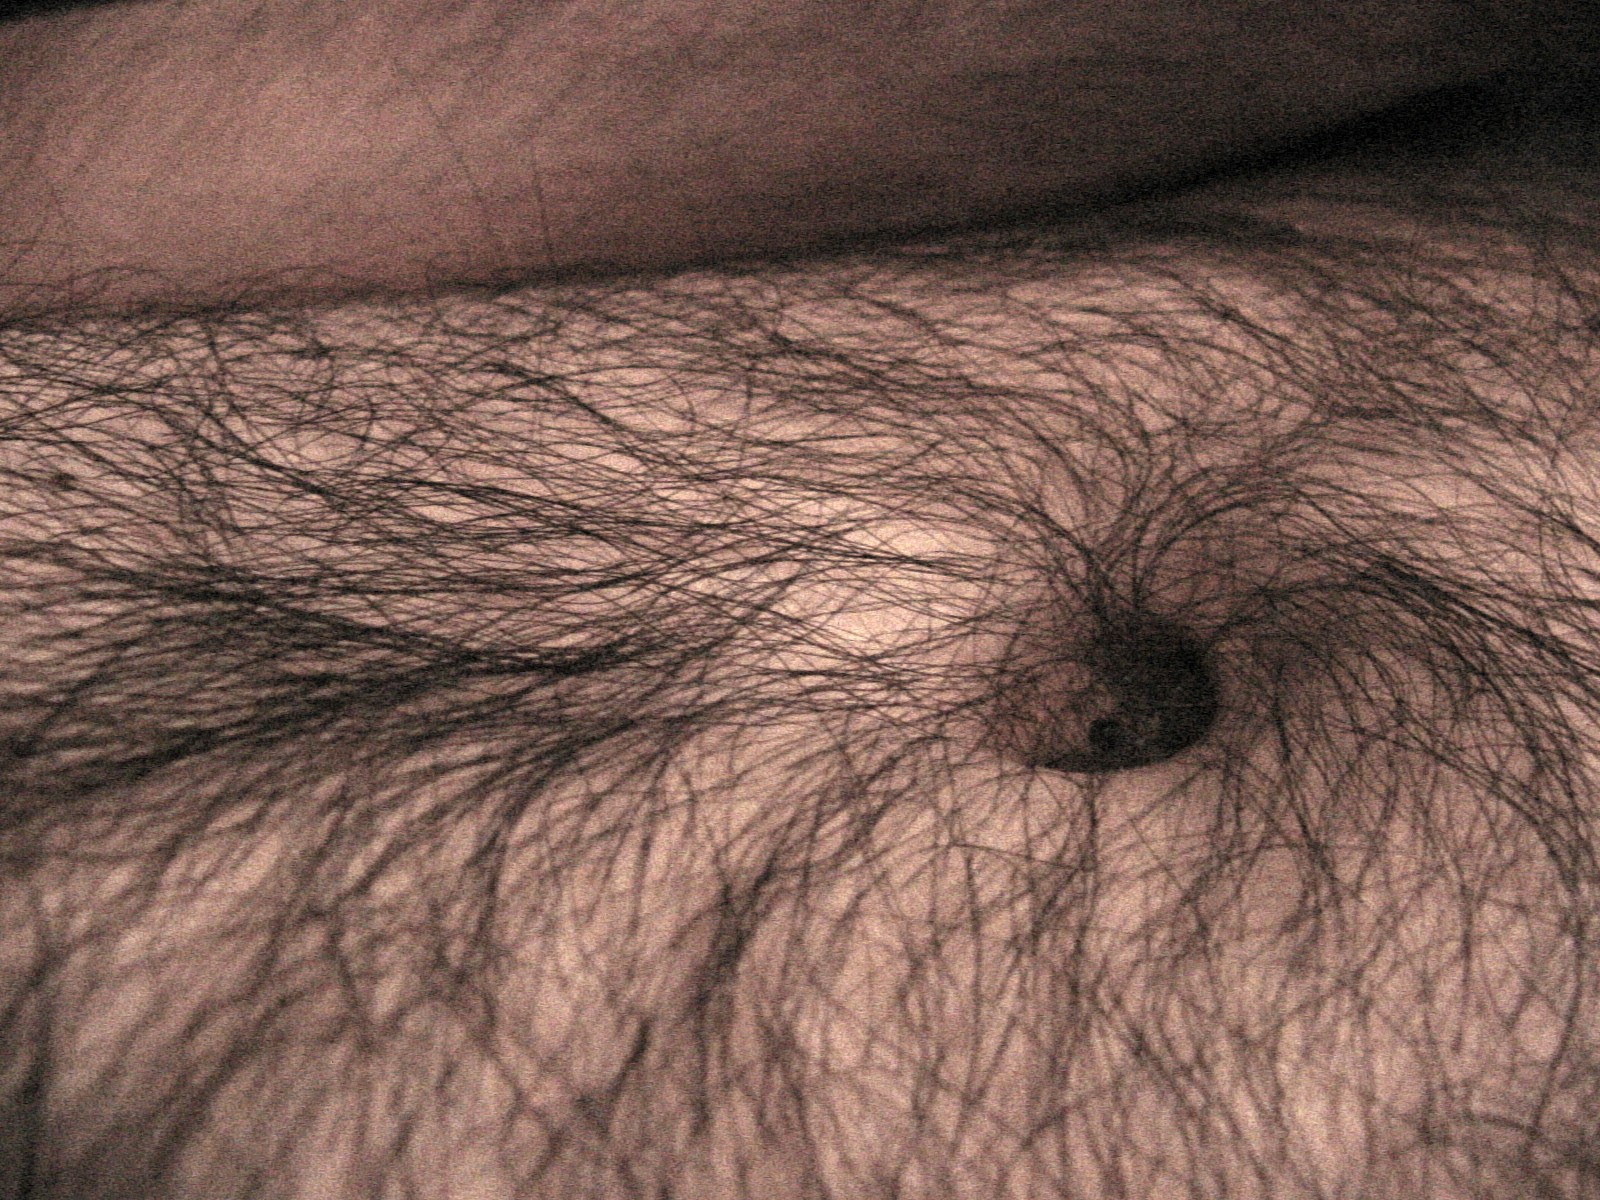 [skin-chest-hairy-male-human-adult-belly-button-2-DHD.jpg]